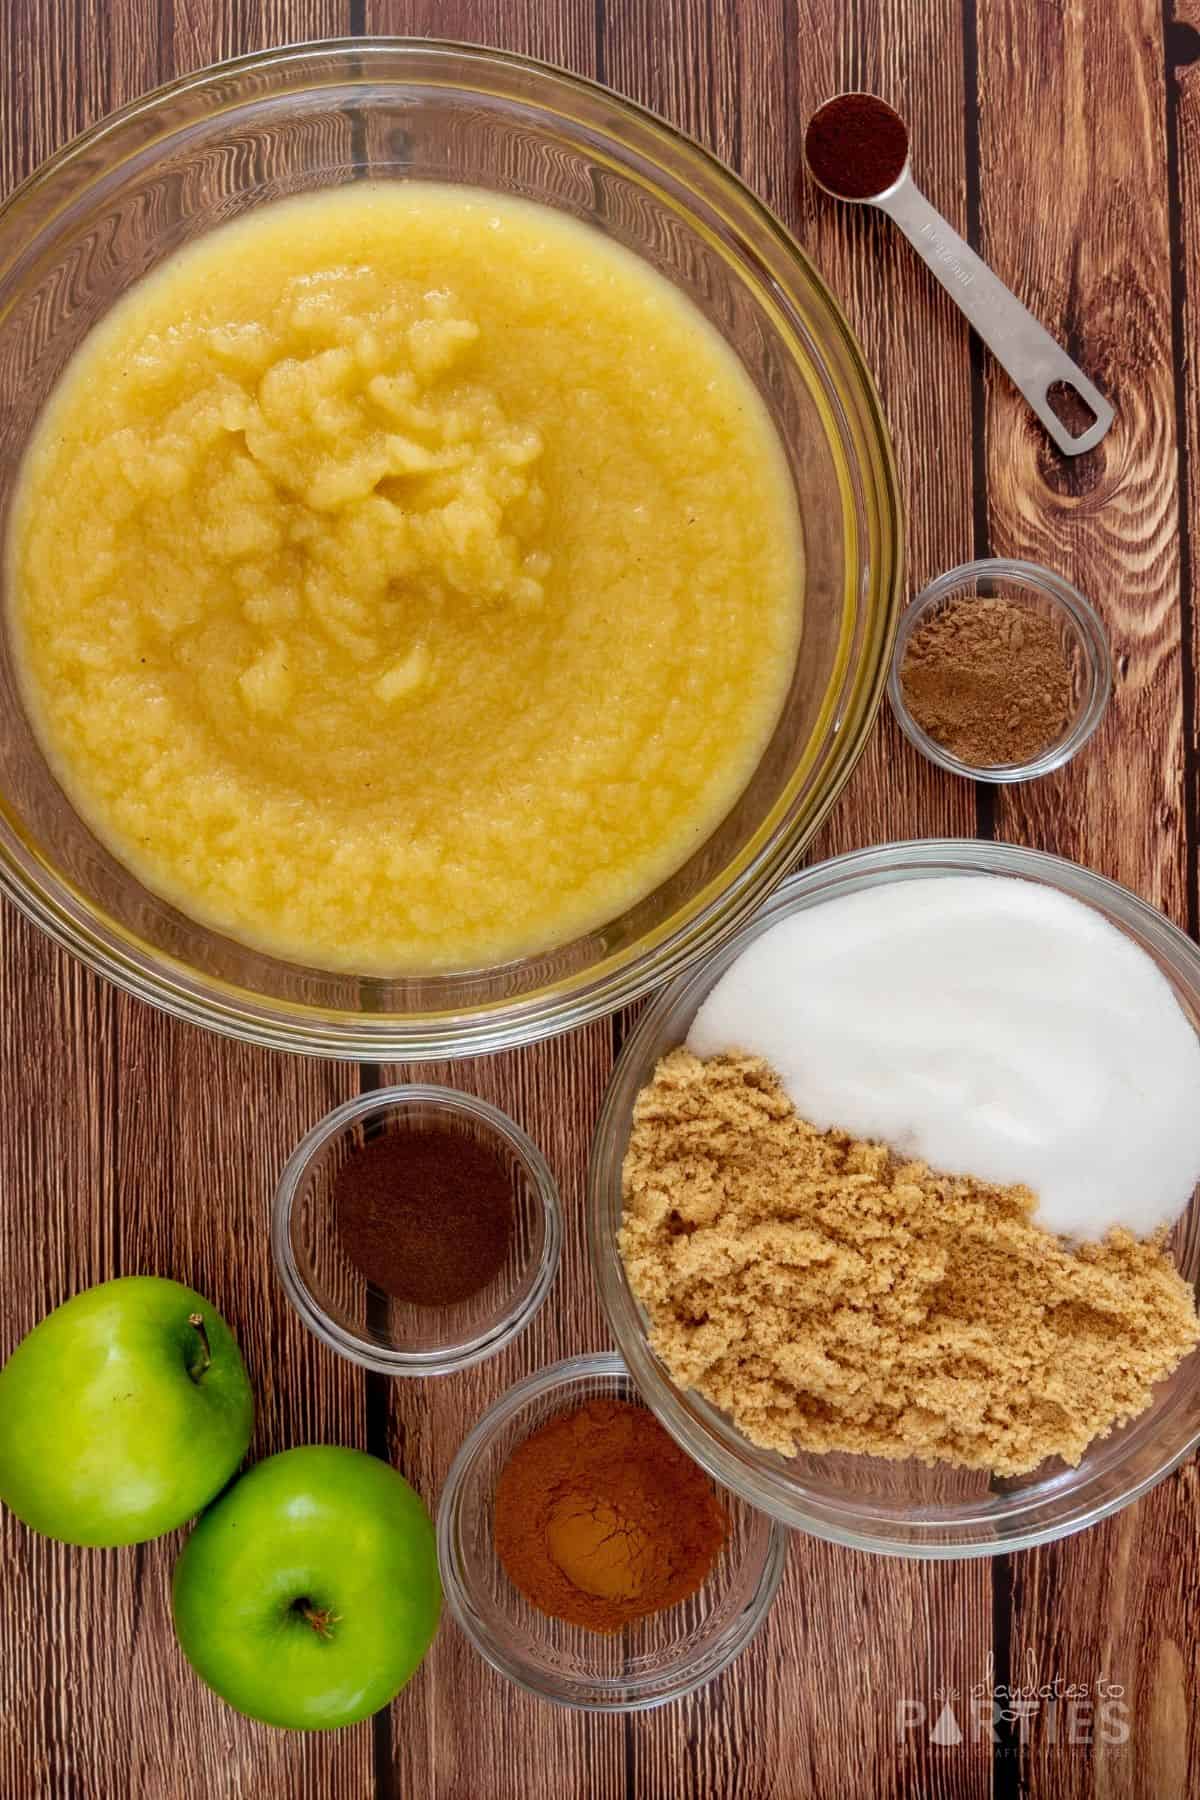 Ingredients for making easy crock pot apple butter with applesauce